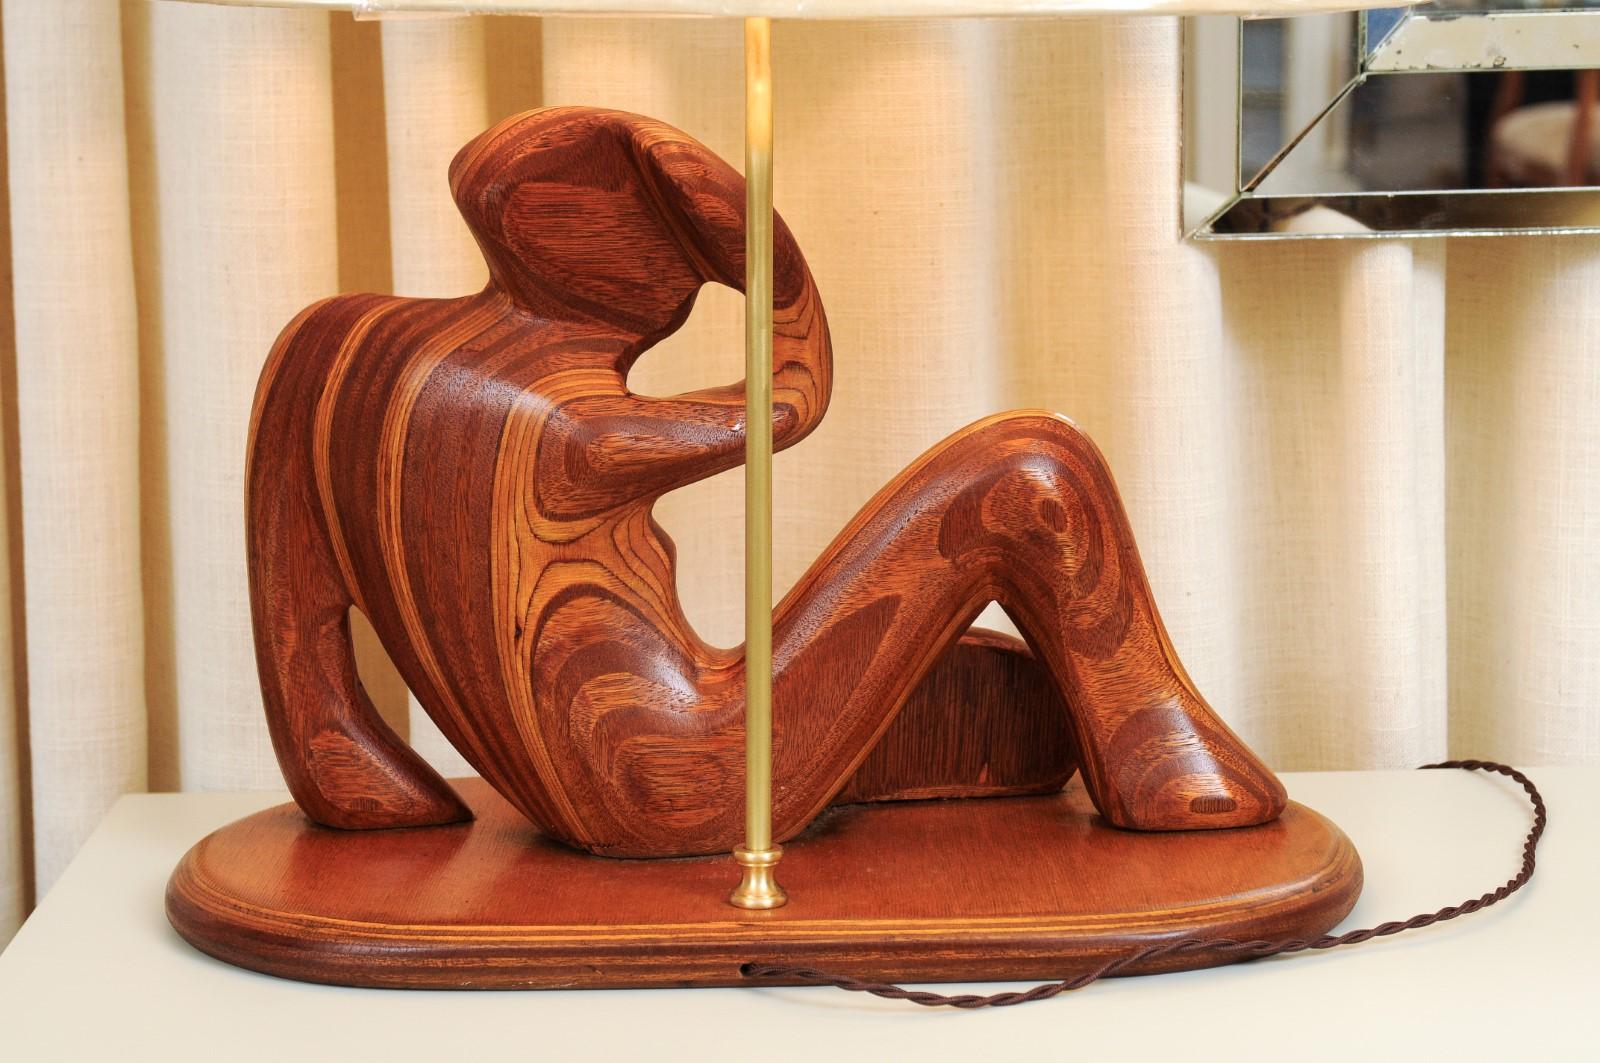  Breathtaking Pair of Birch and Mahogany Sculptures as Lamps, circa 1985 For Sale 9